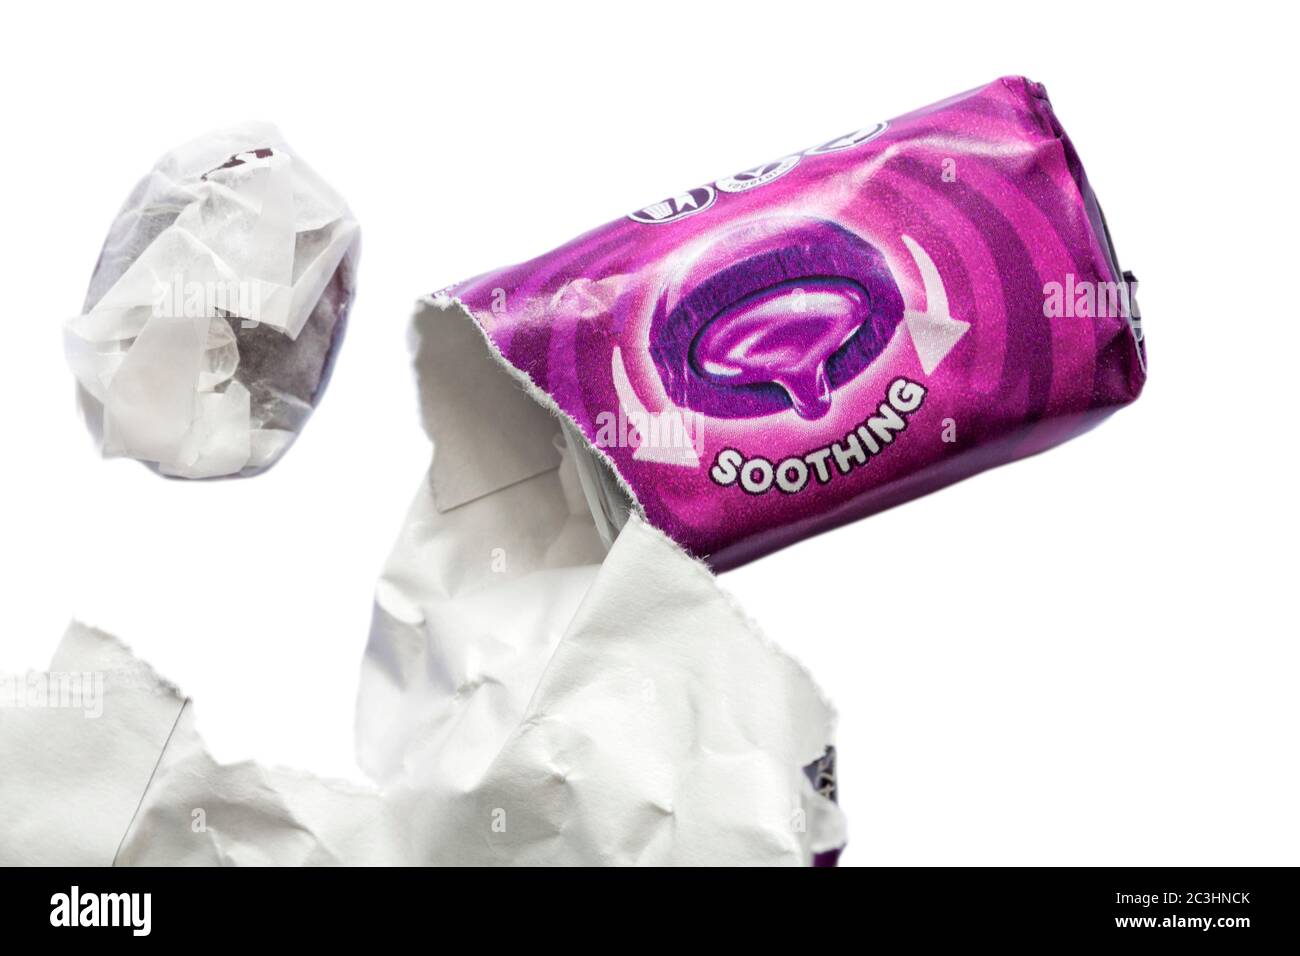 soothing Halls Soothers sweets blackcurrant flavour with sweet removed from packet set on white background Stock Photo